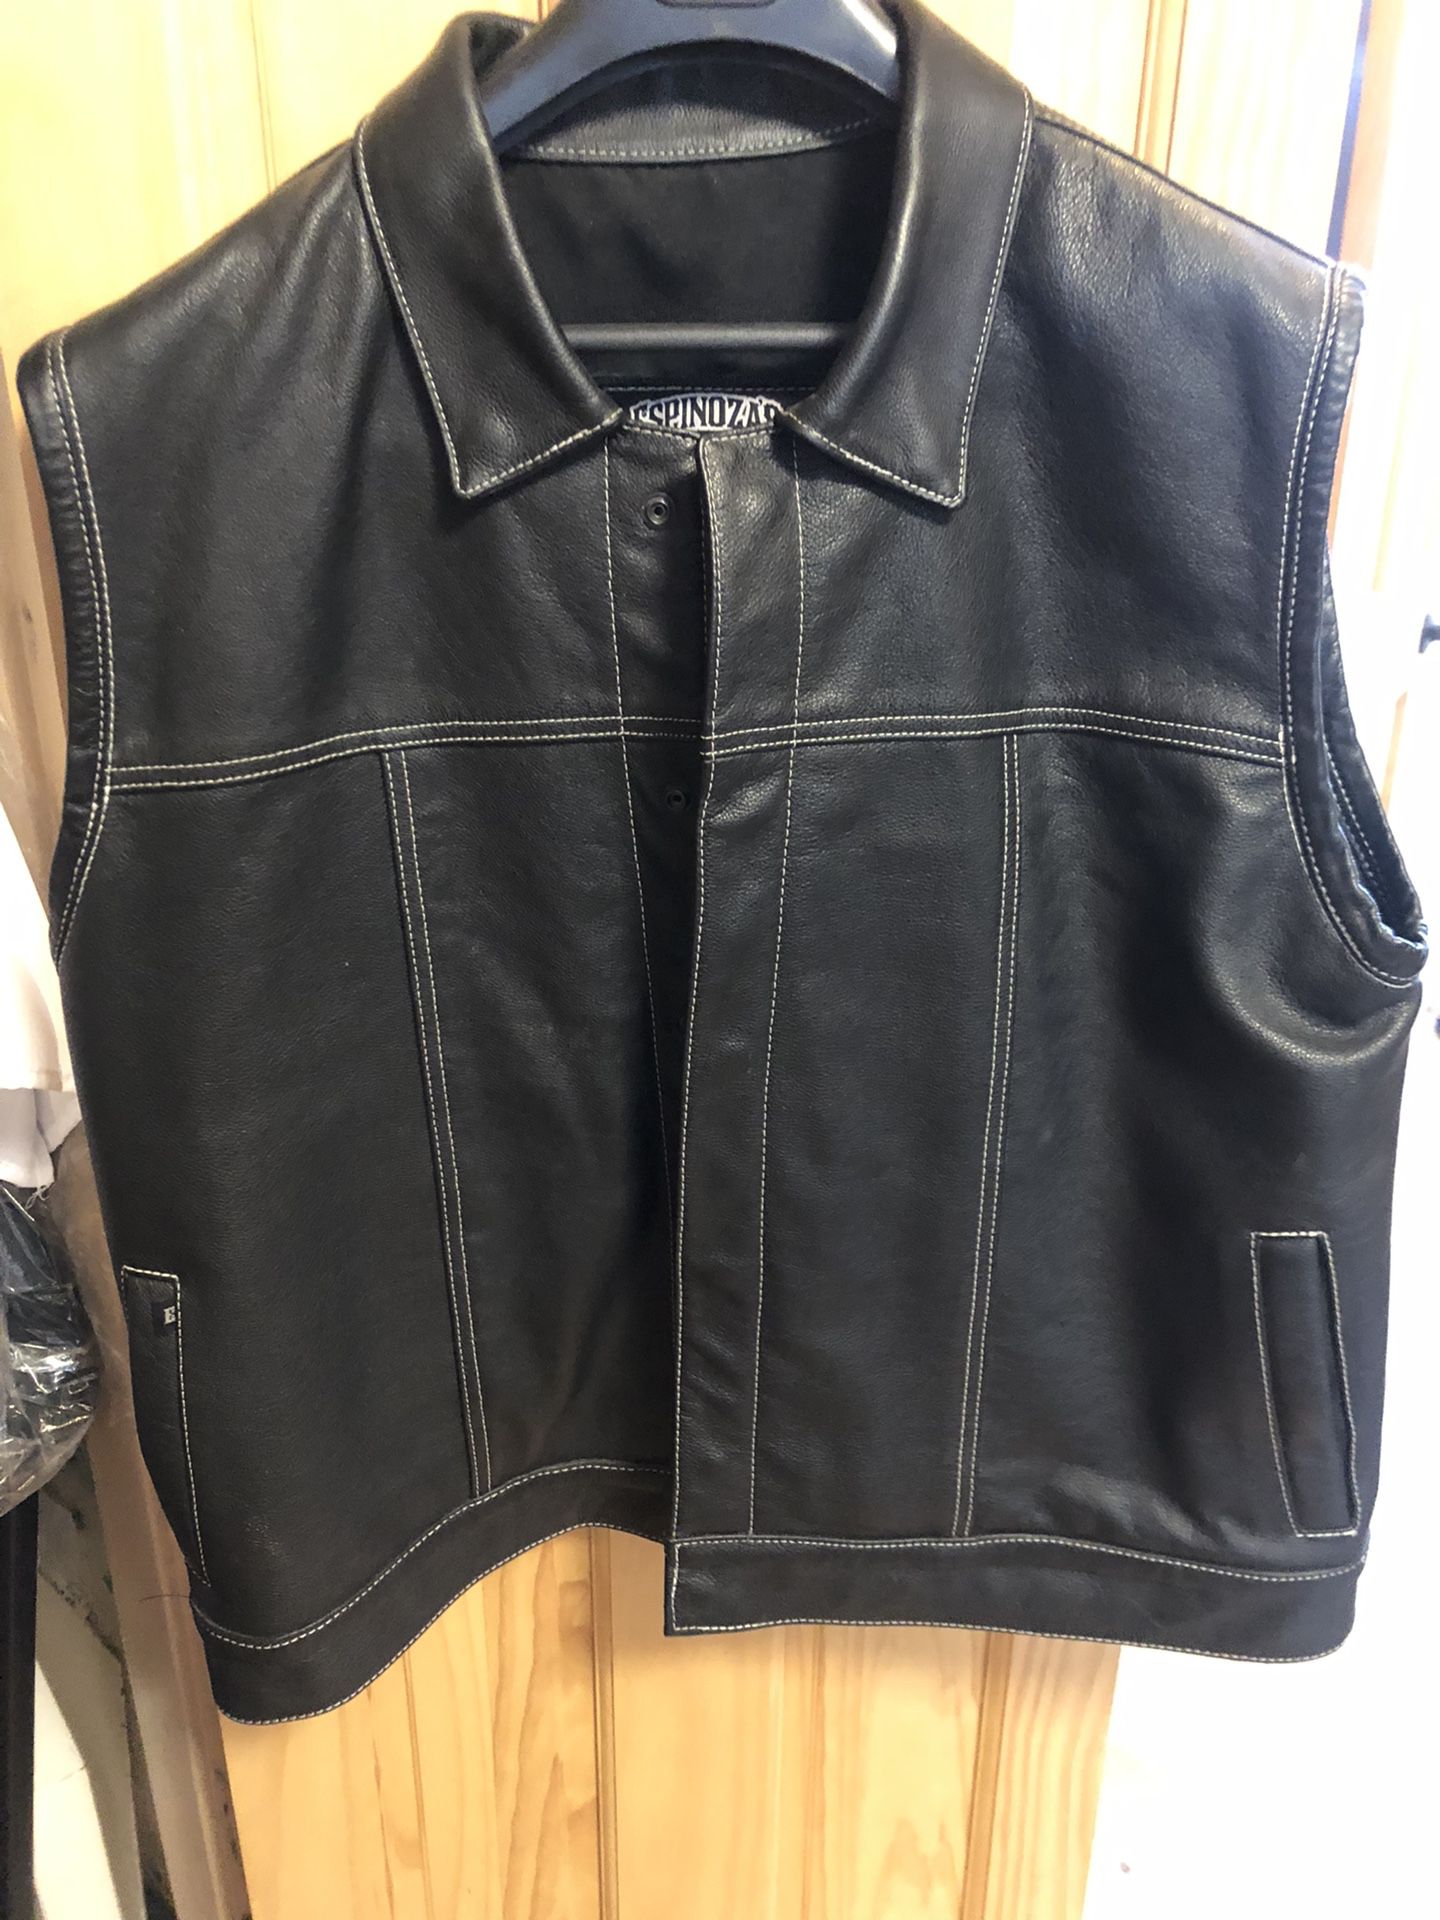 Motorcycle Leather Vest High Quality 